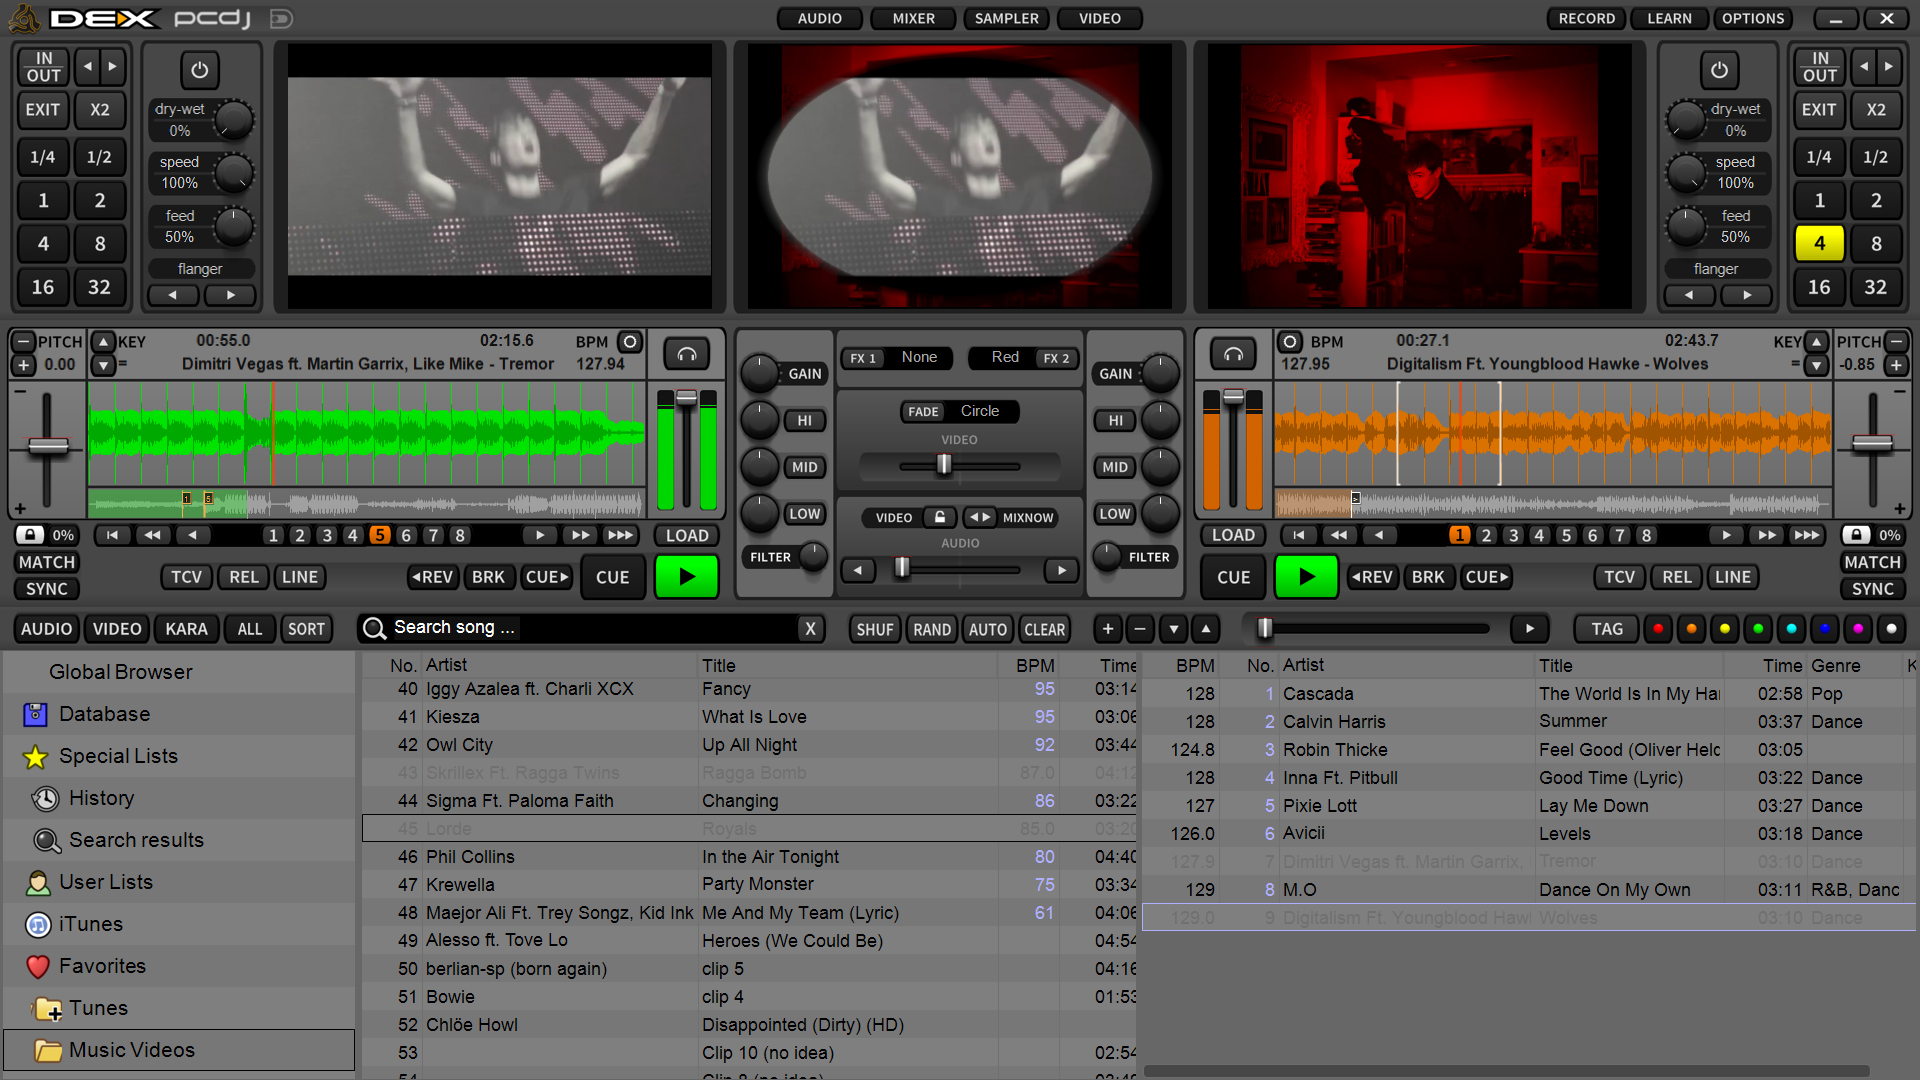 download the new for apple PCDJ DEX 3.20.7